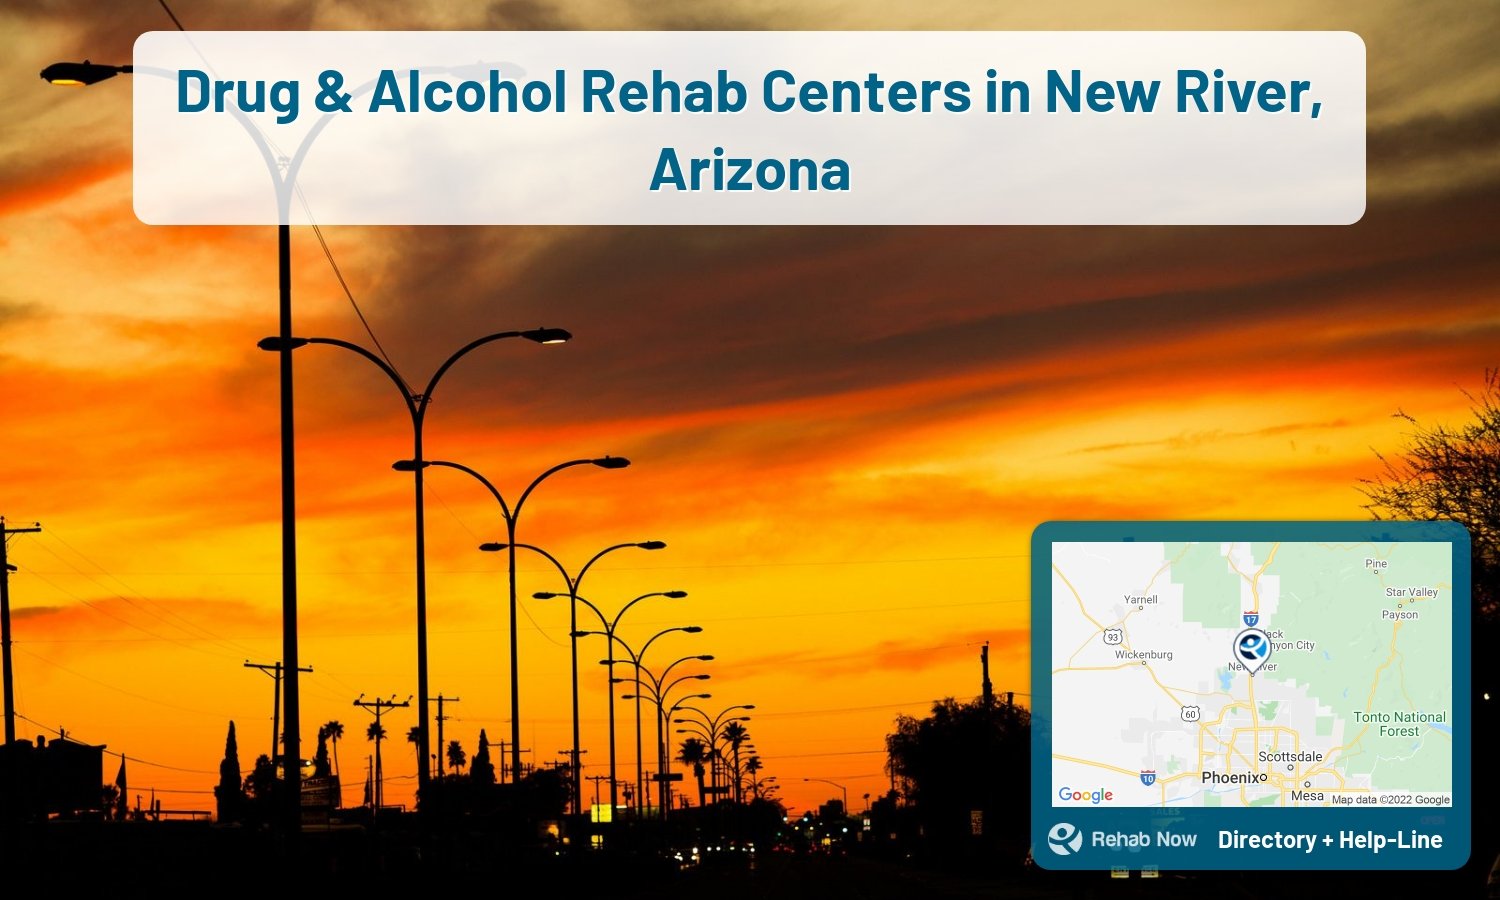 View options, availability, treatment methods, and more, for drug rehab and alcohol treatment in New River, Arizona